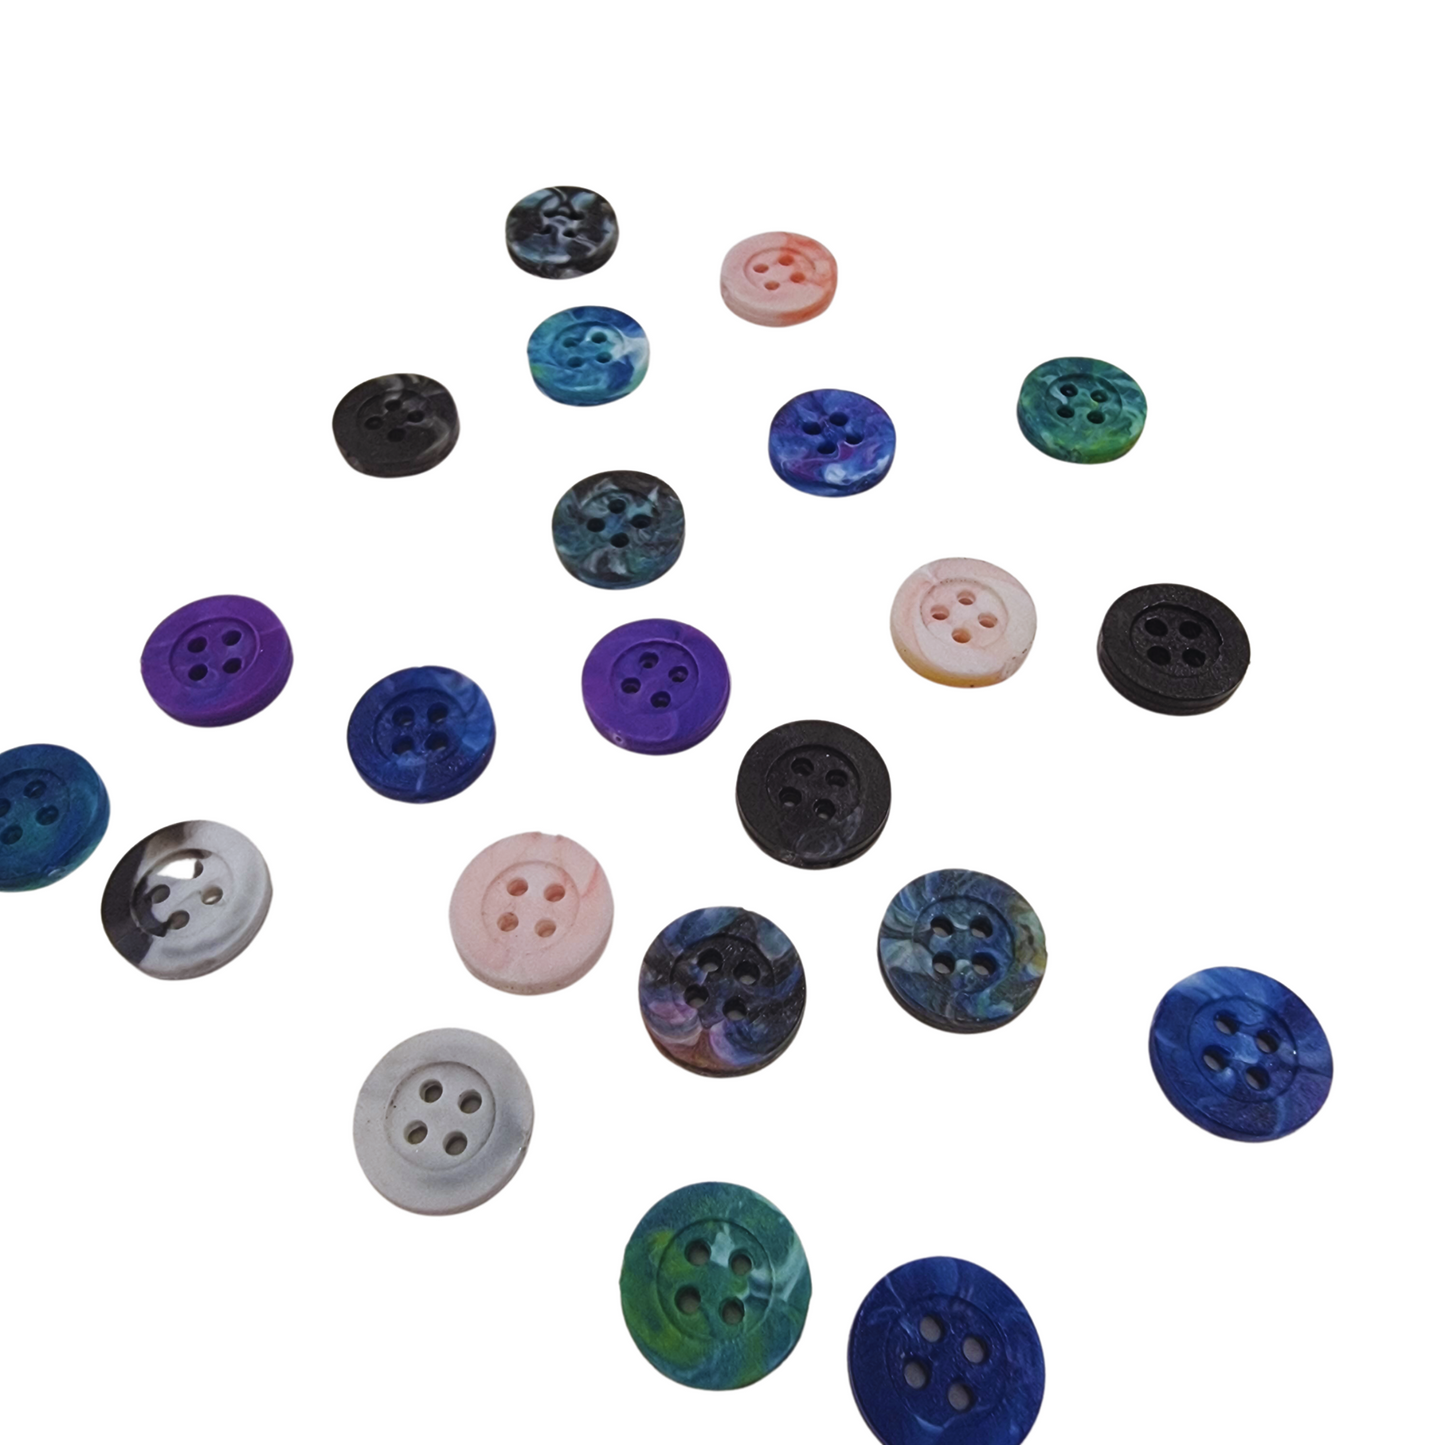 Mixed Assortment Buttons | 100% Recycled Plastic Buttons